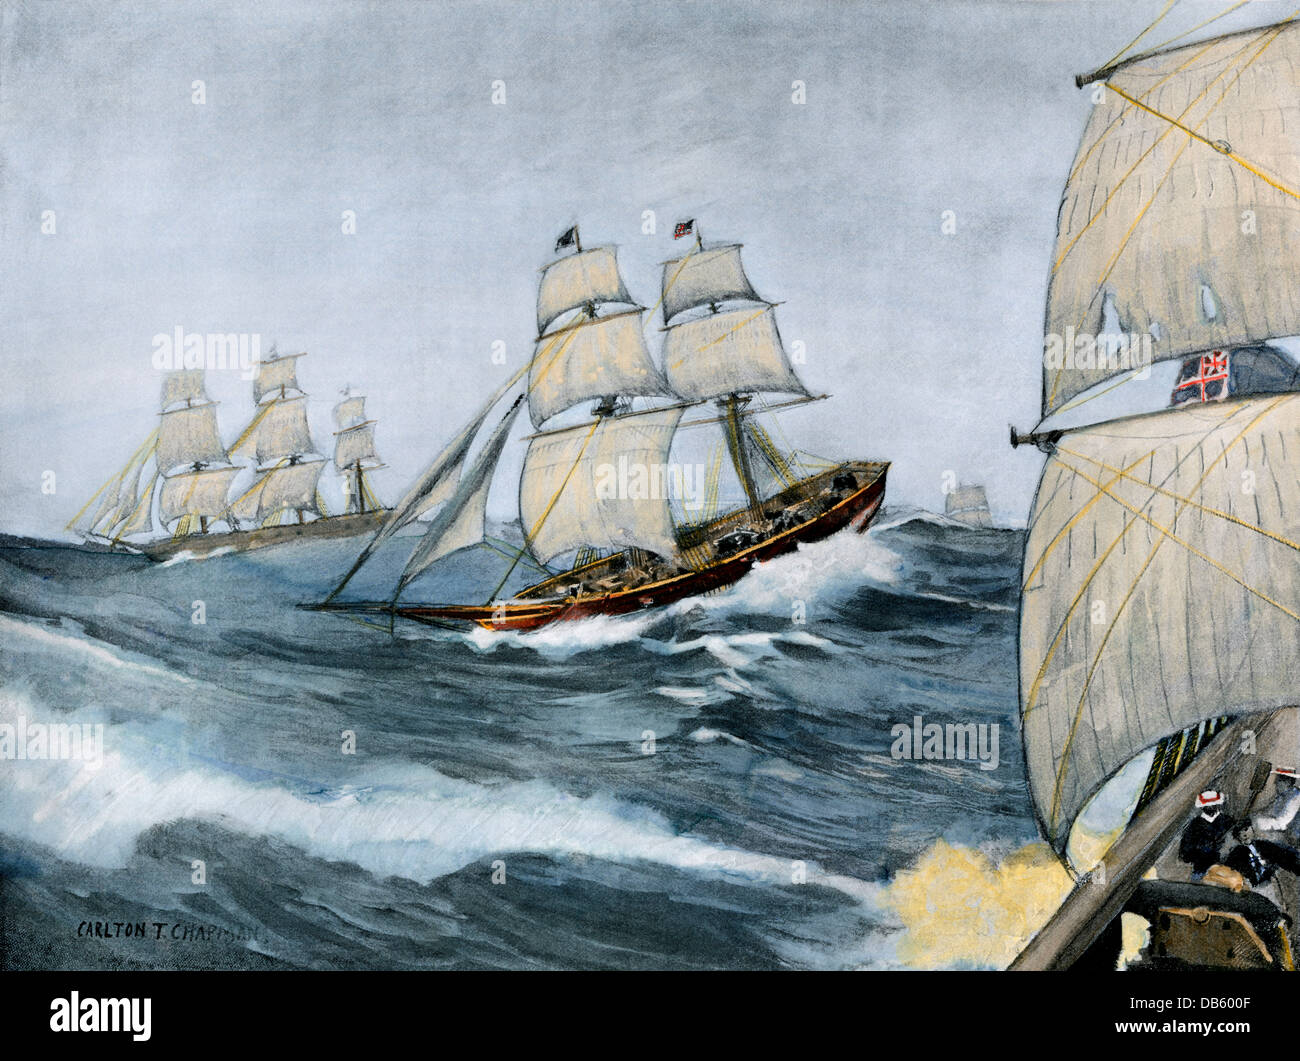 American privateer 'Comet' sailing through the English fleet, War of 1812. Hand-colored halftone of an illustration Stock Photo